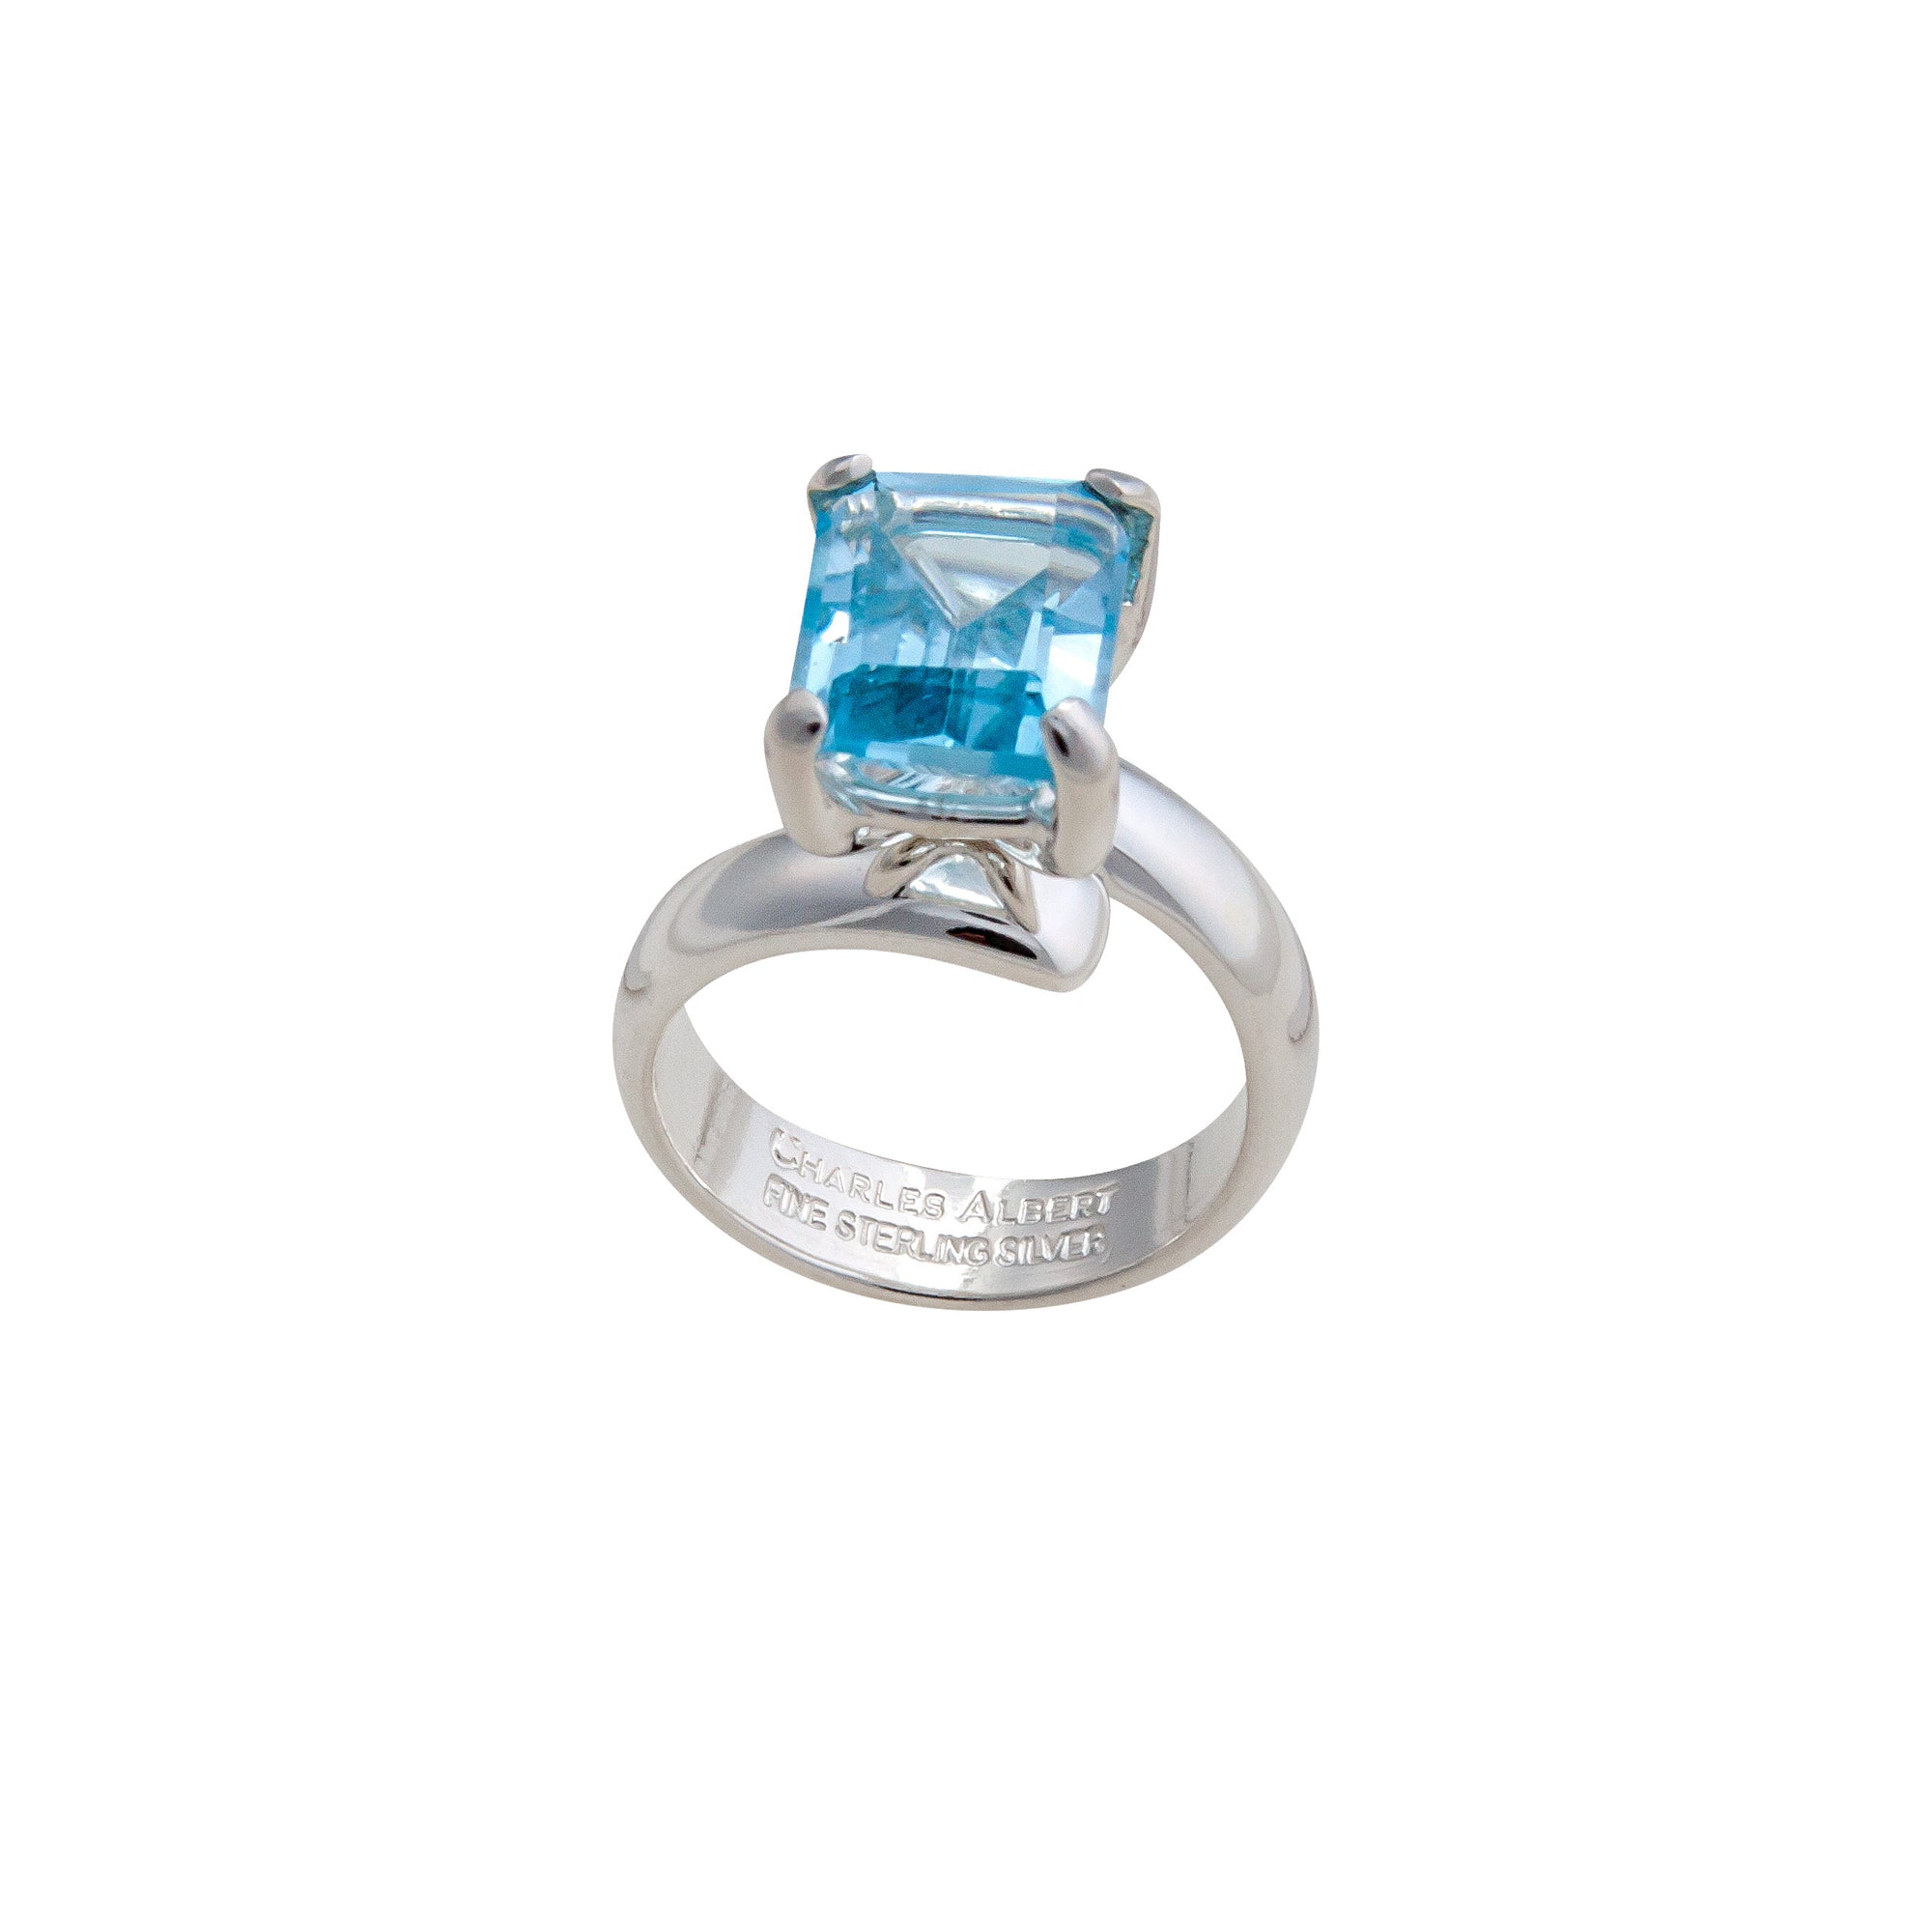 Sterling Silver Blue Topaz Petite Prong Set Adjustable Ring | Charles Albert Jewelry